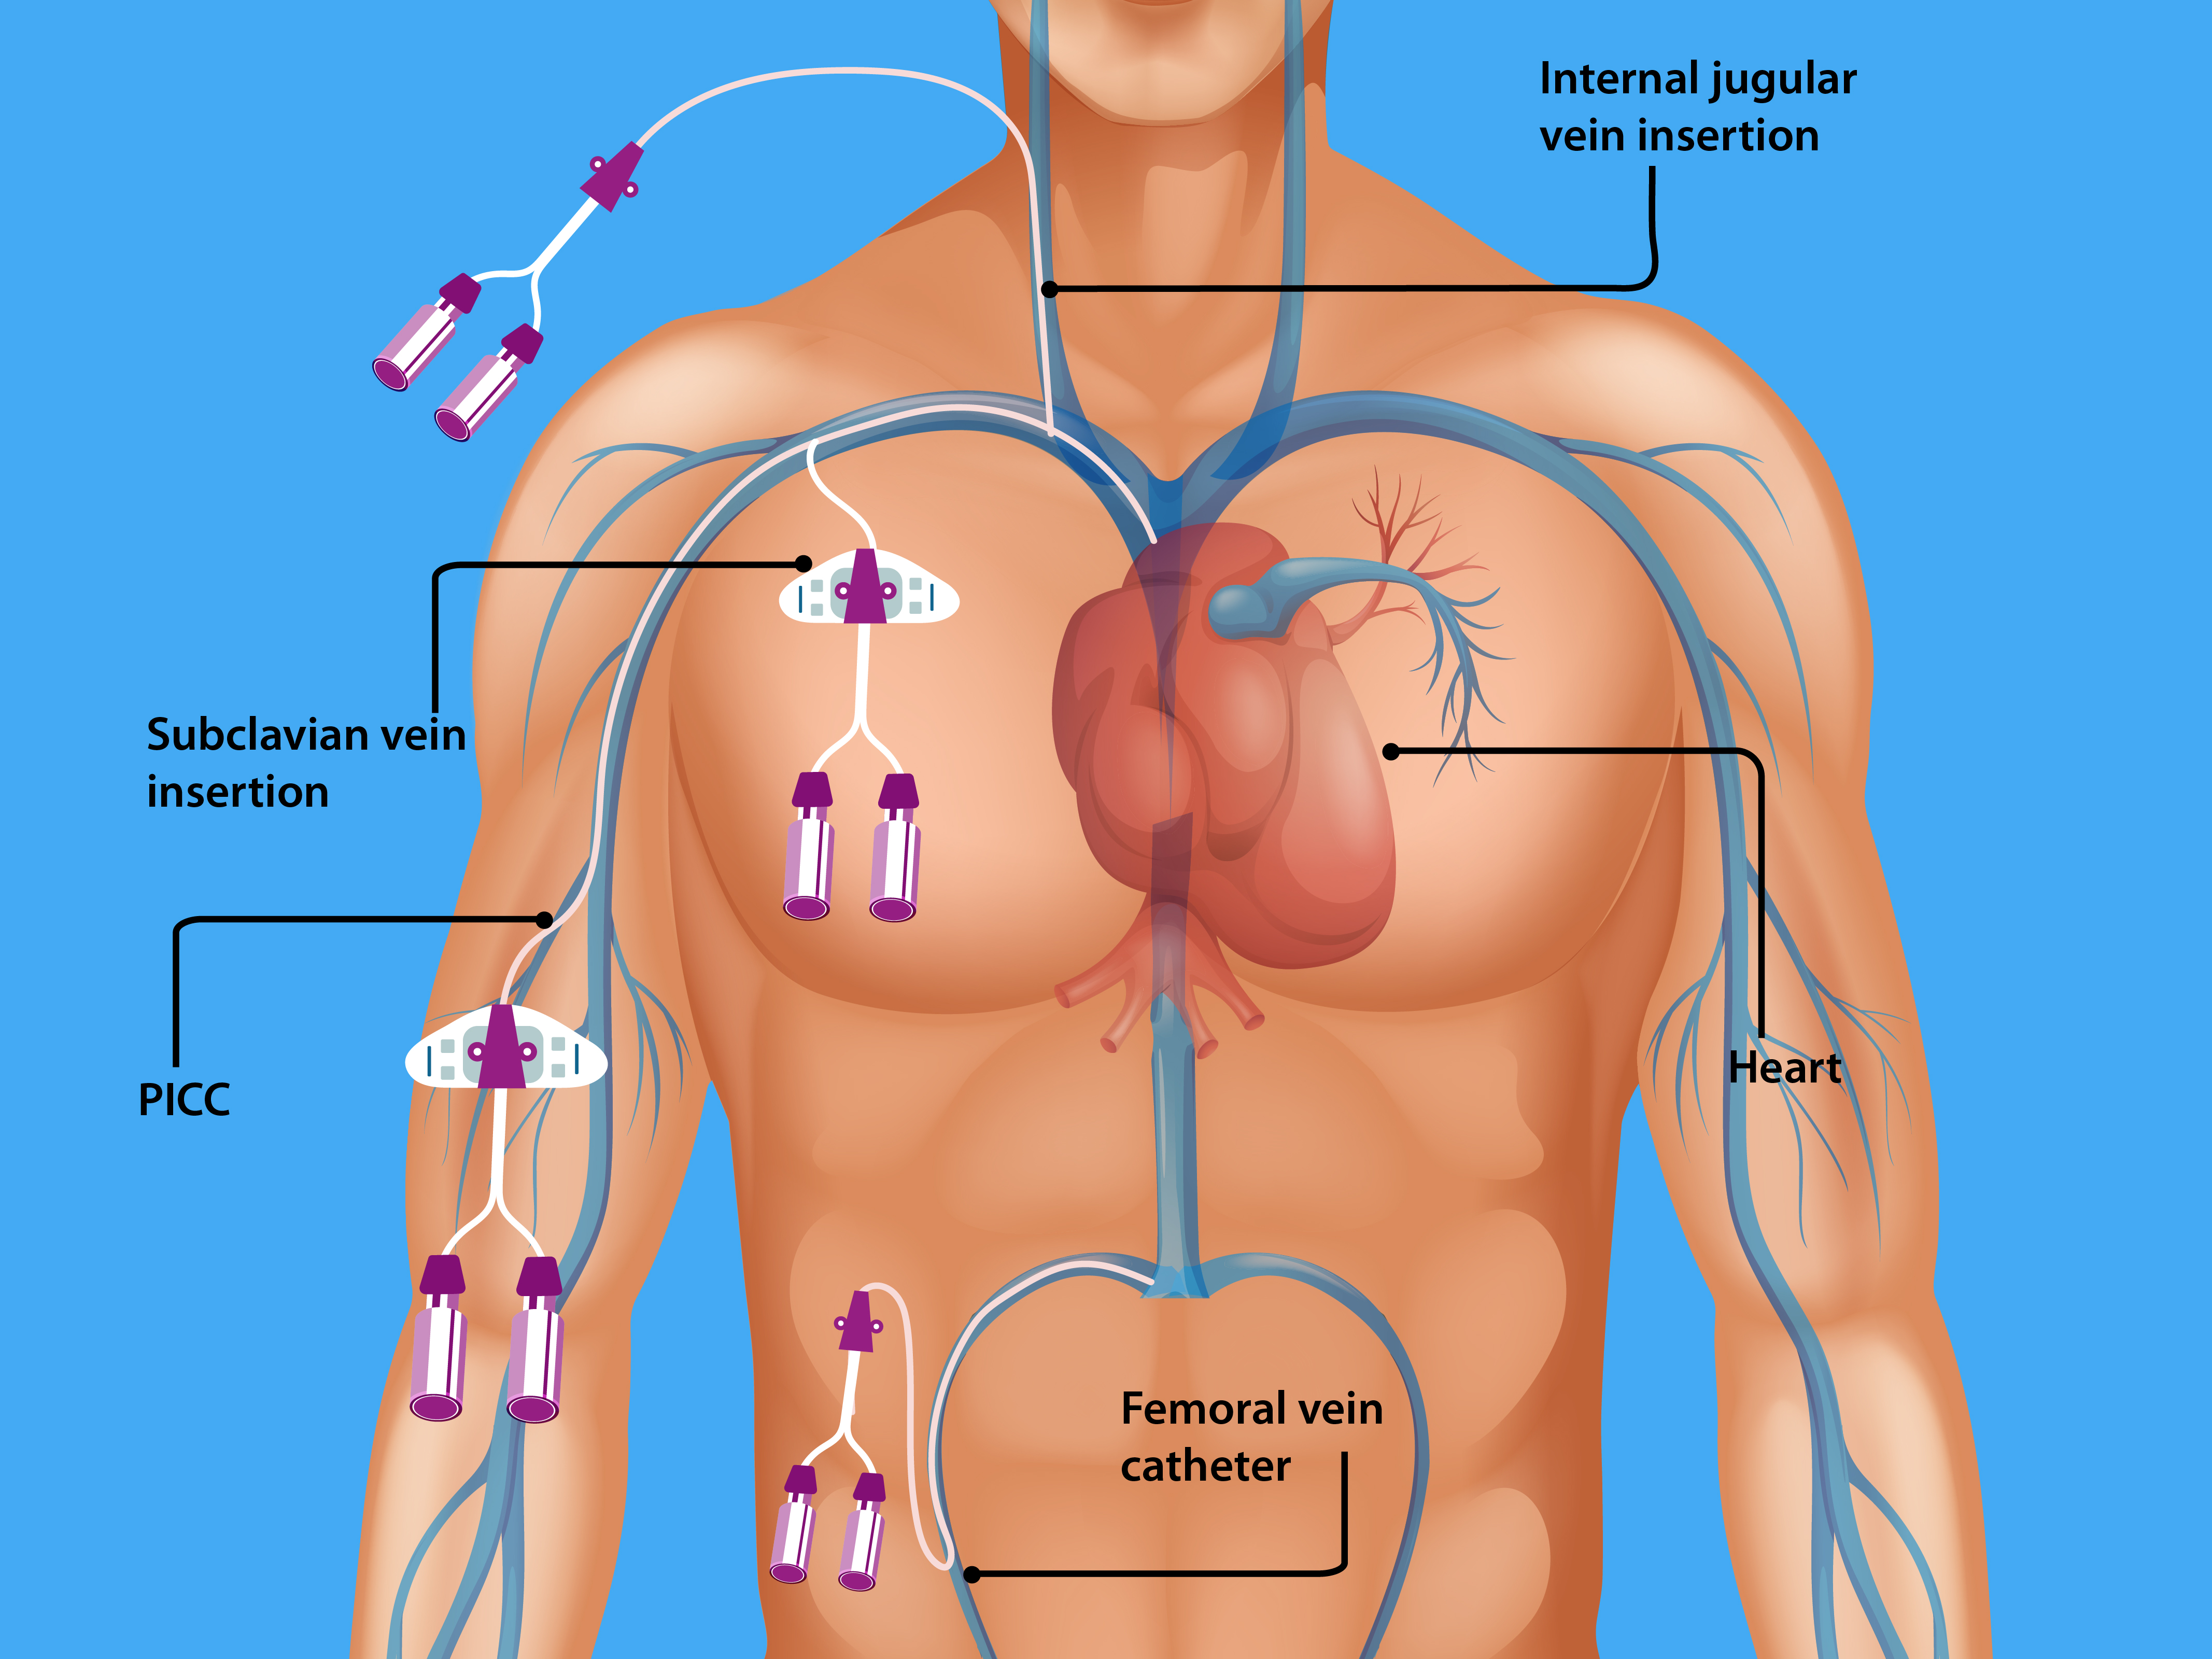 This image shows different access in the body for central venous catheterization.